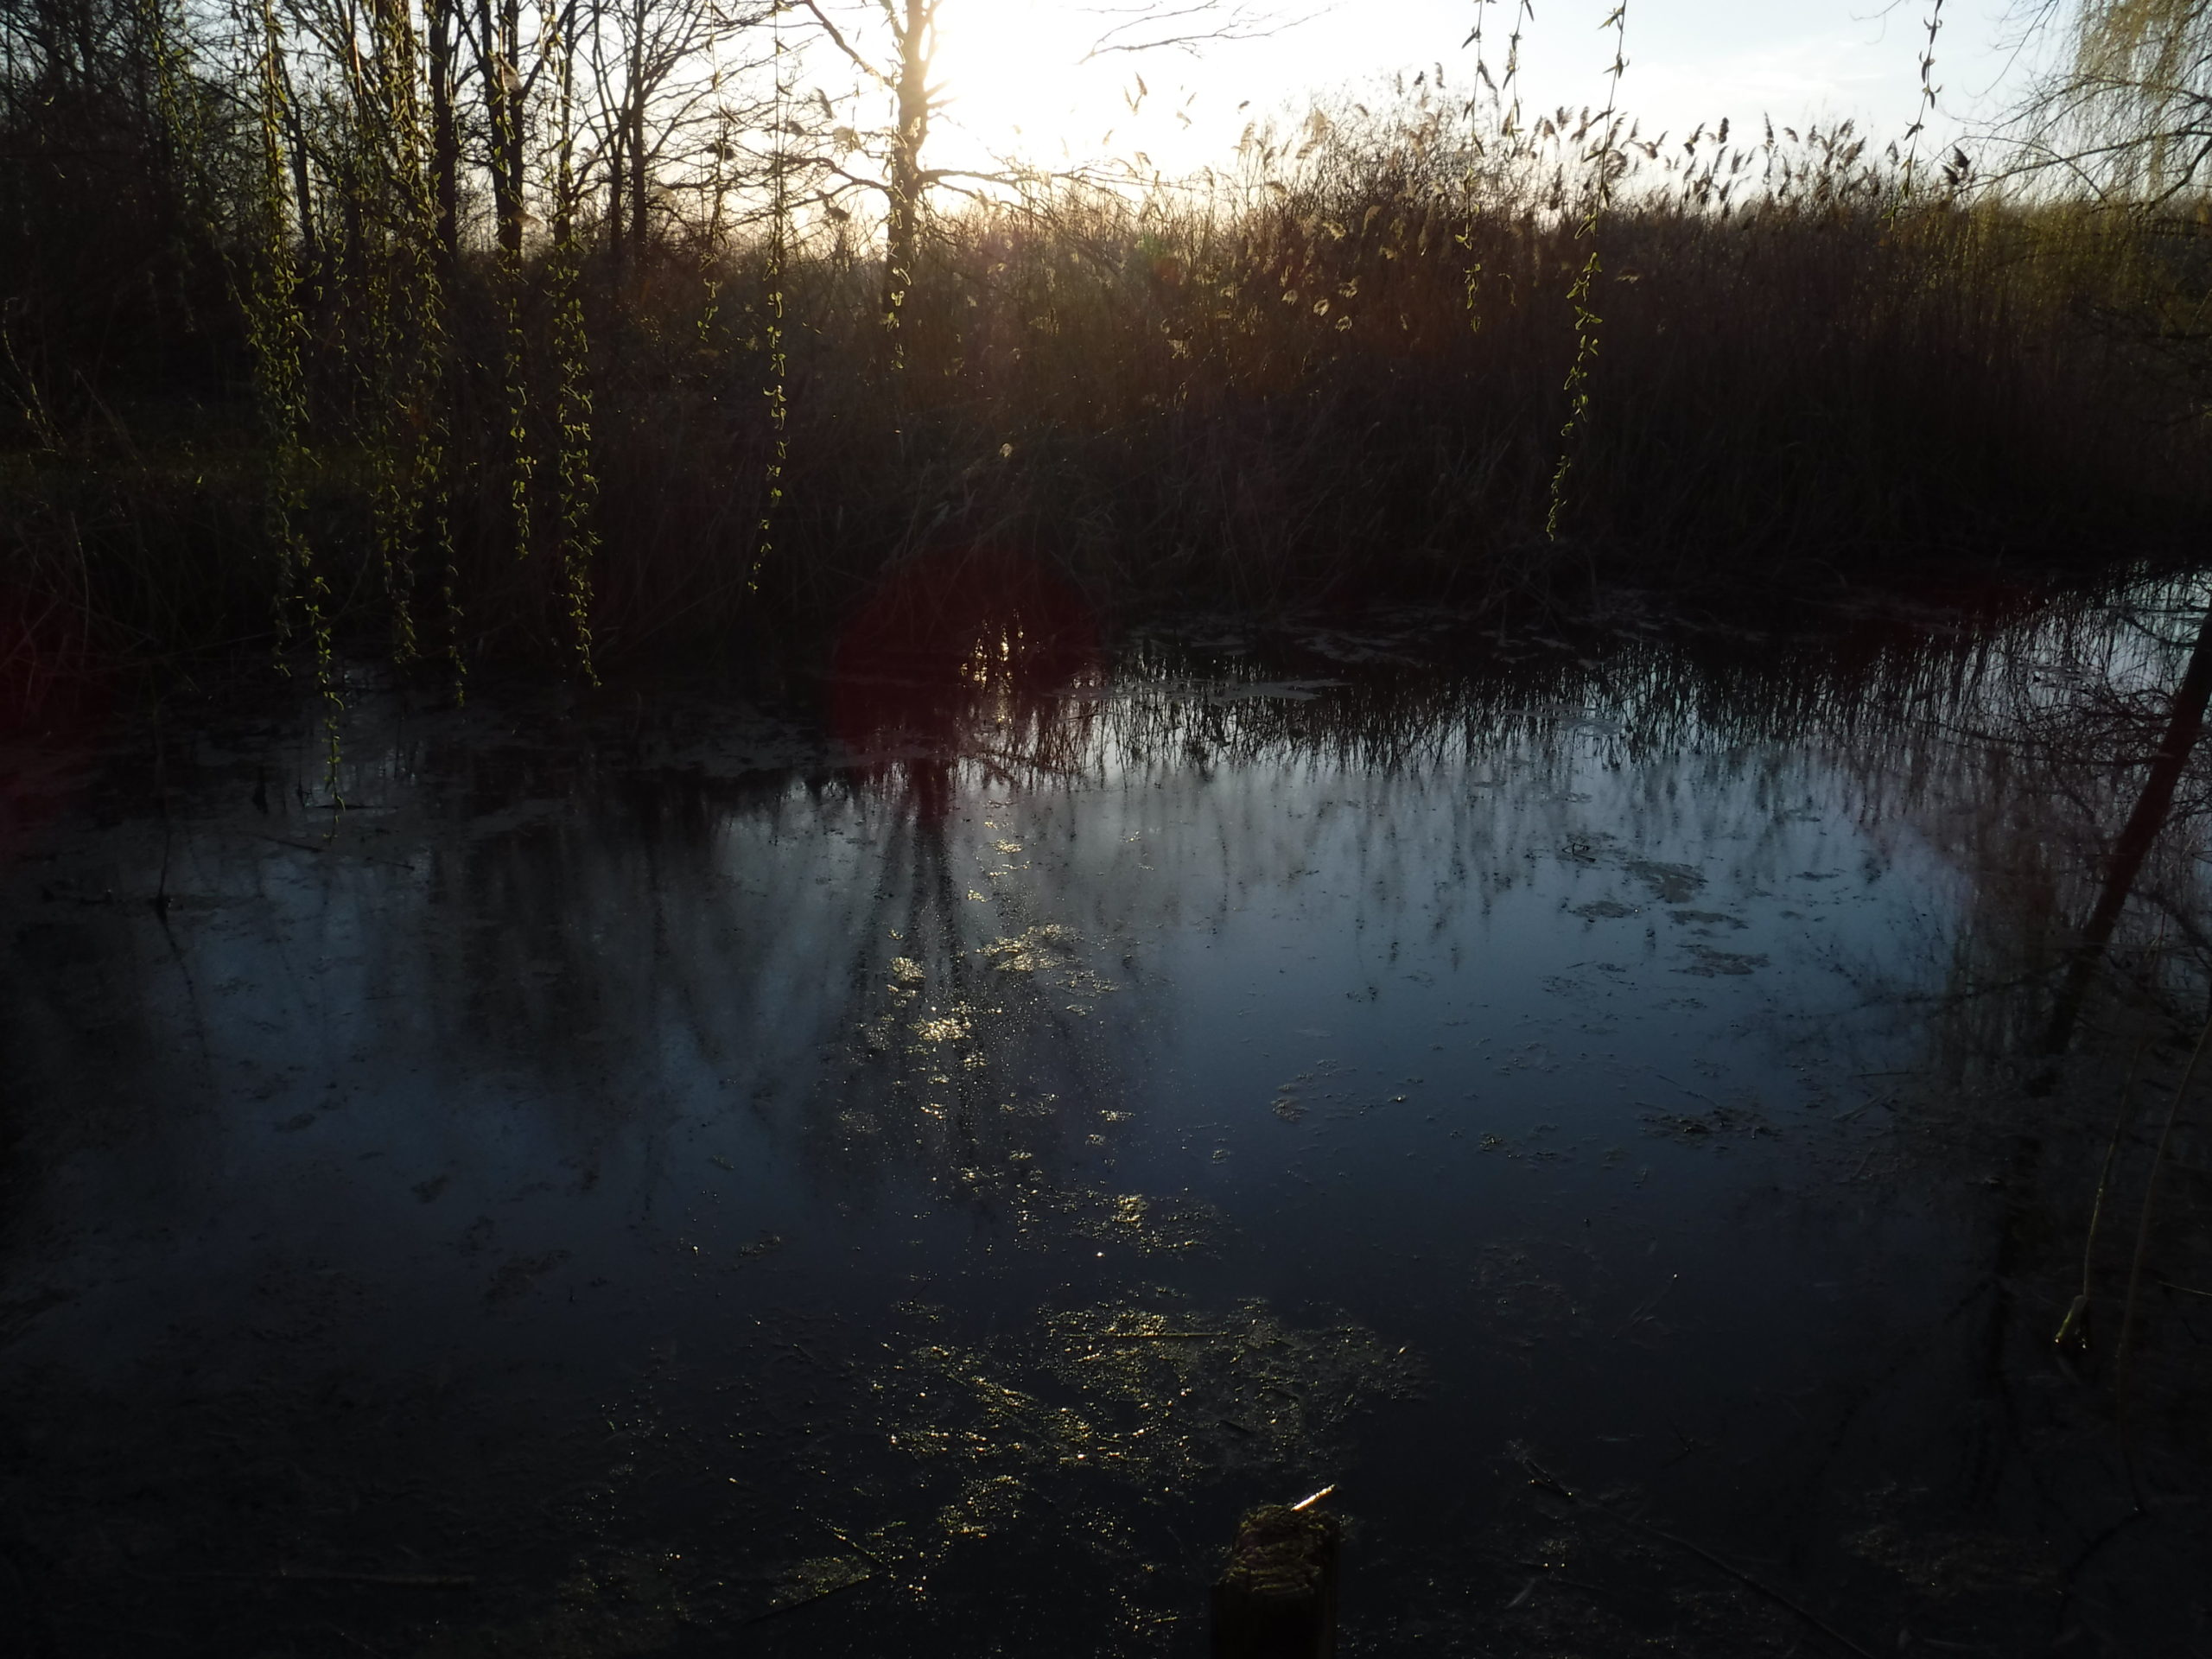 The pond and the sky - very late in the day